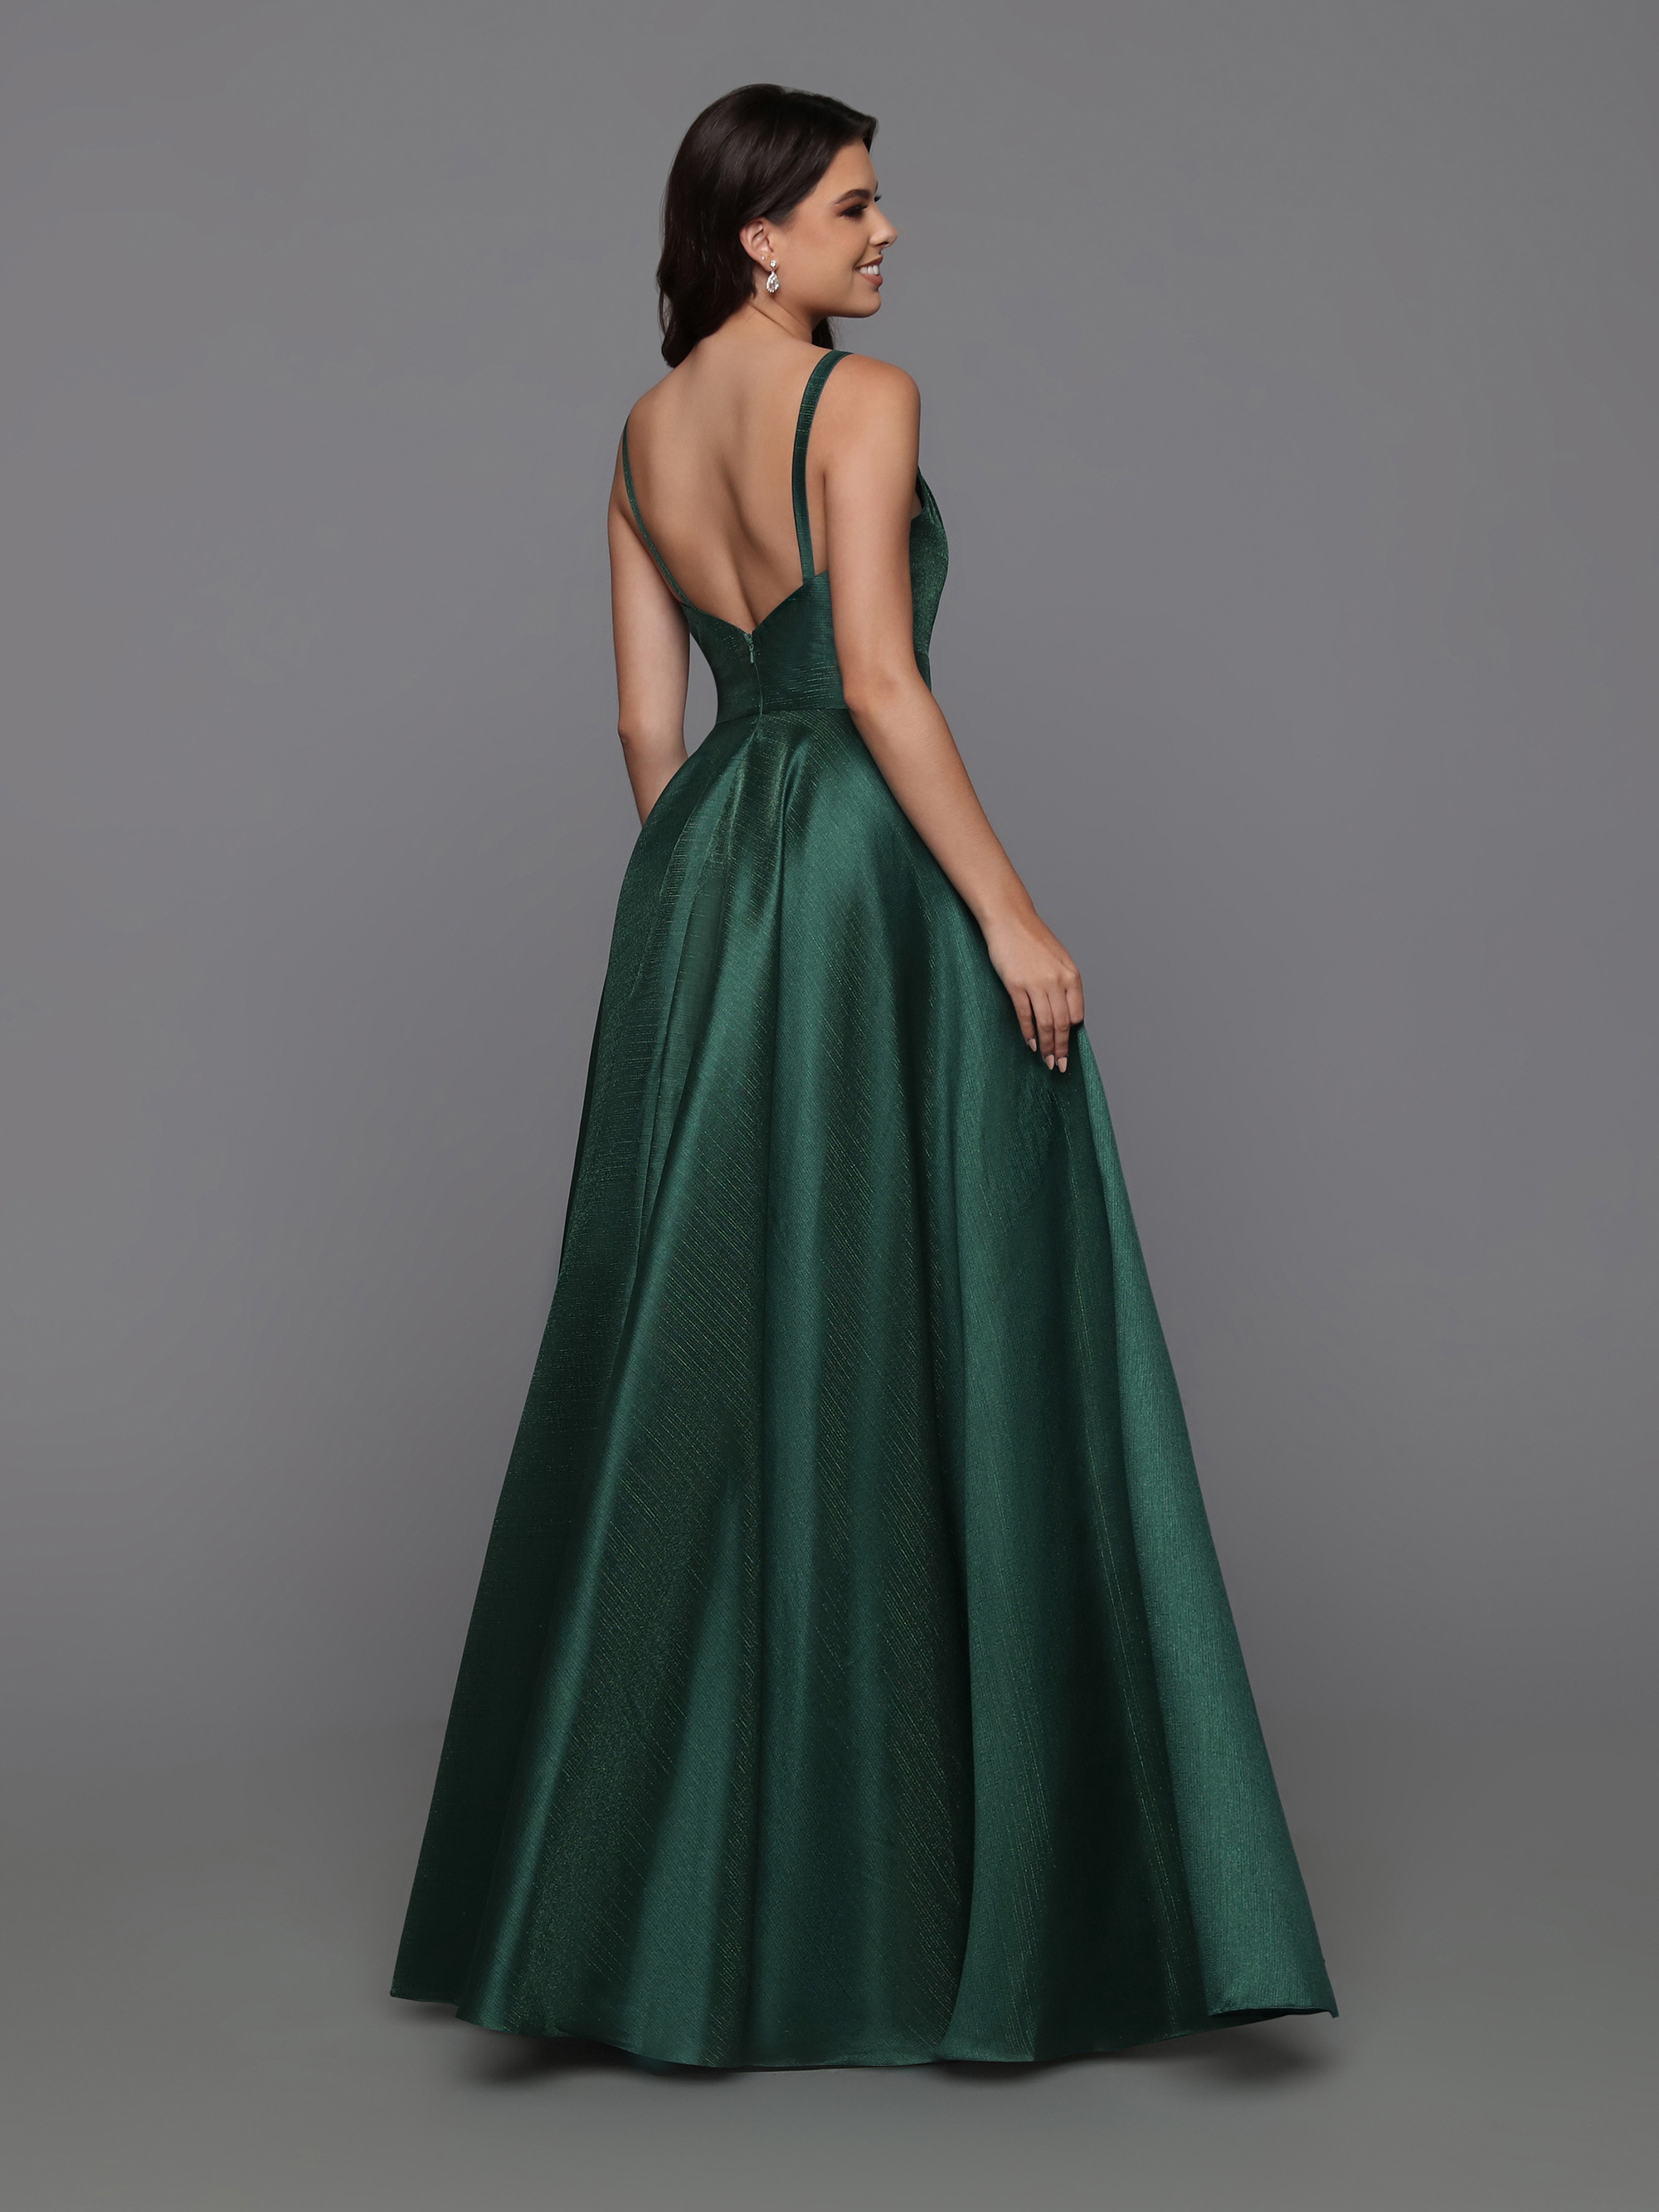 Back view of Style : 72228